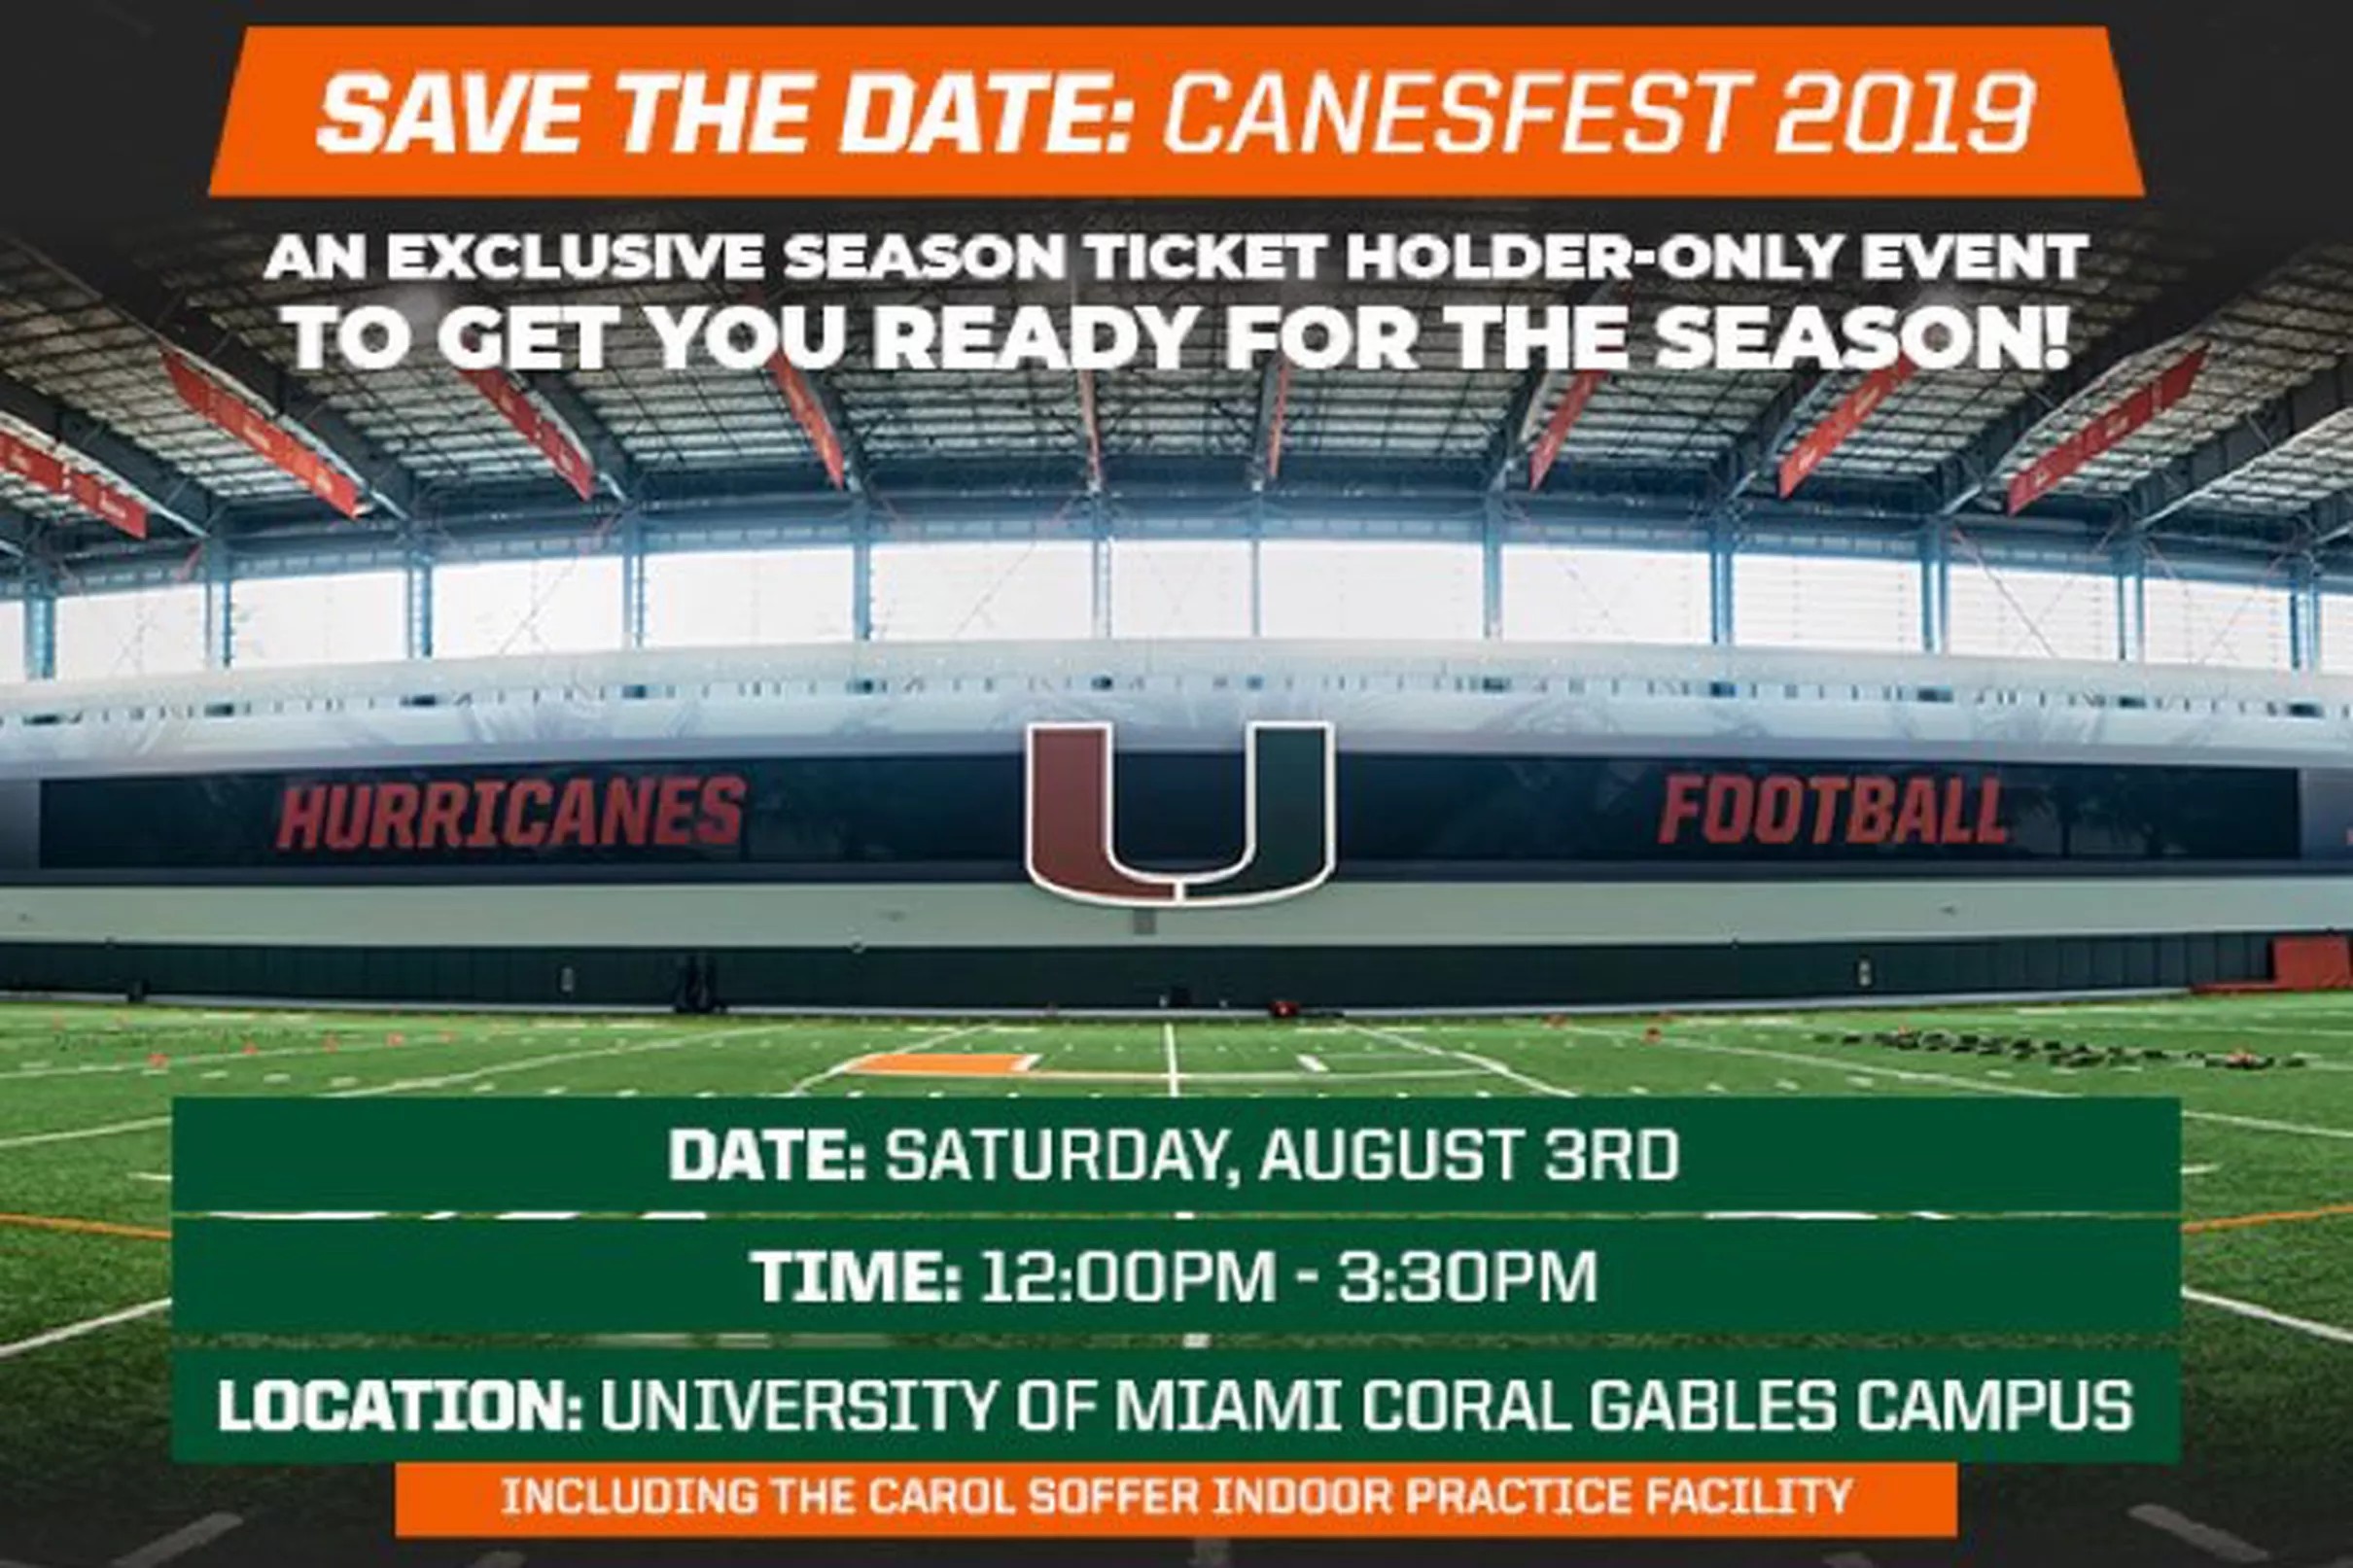 CANES FEST TICKETS AVAILABLE NOW